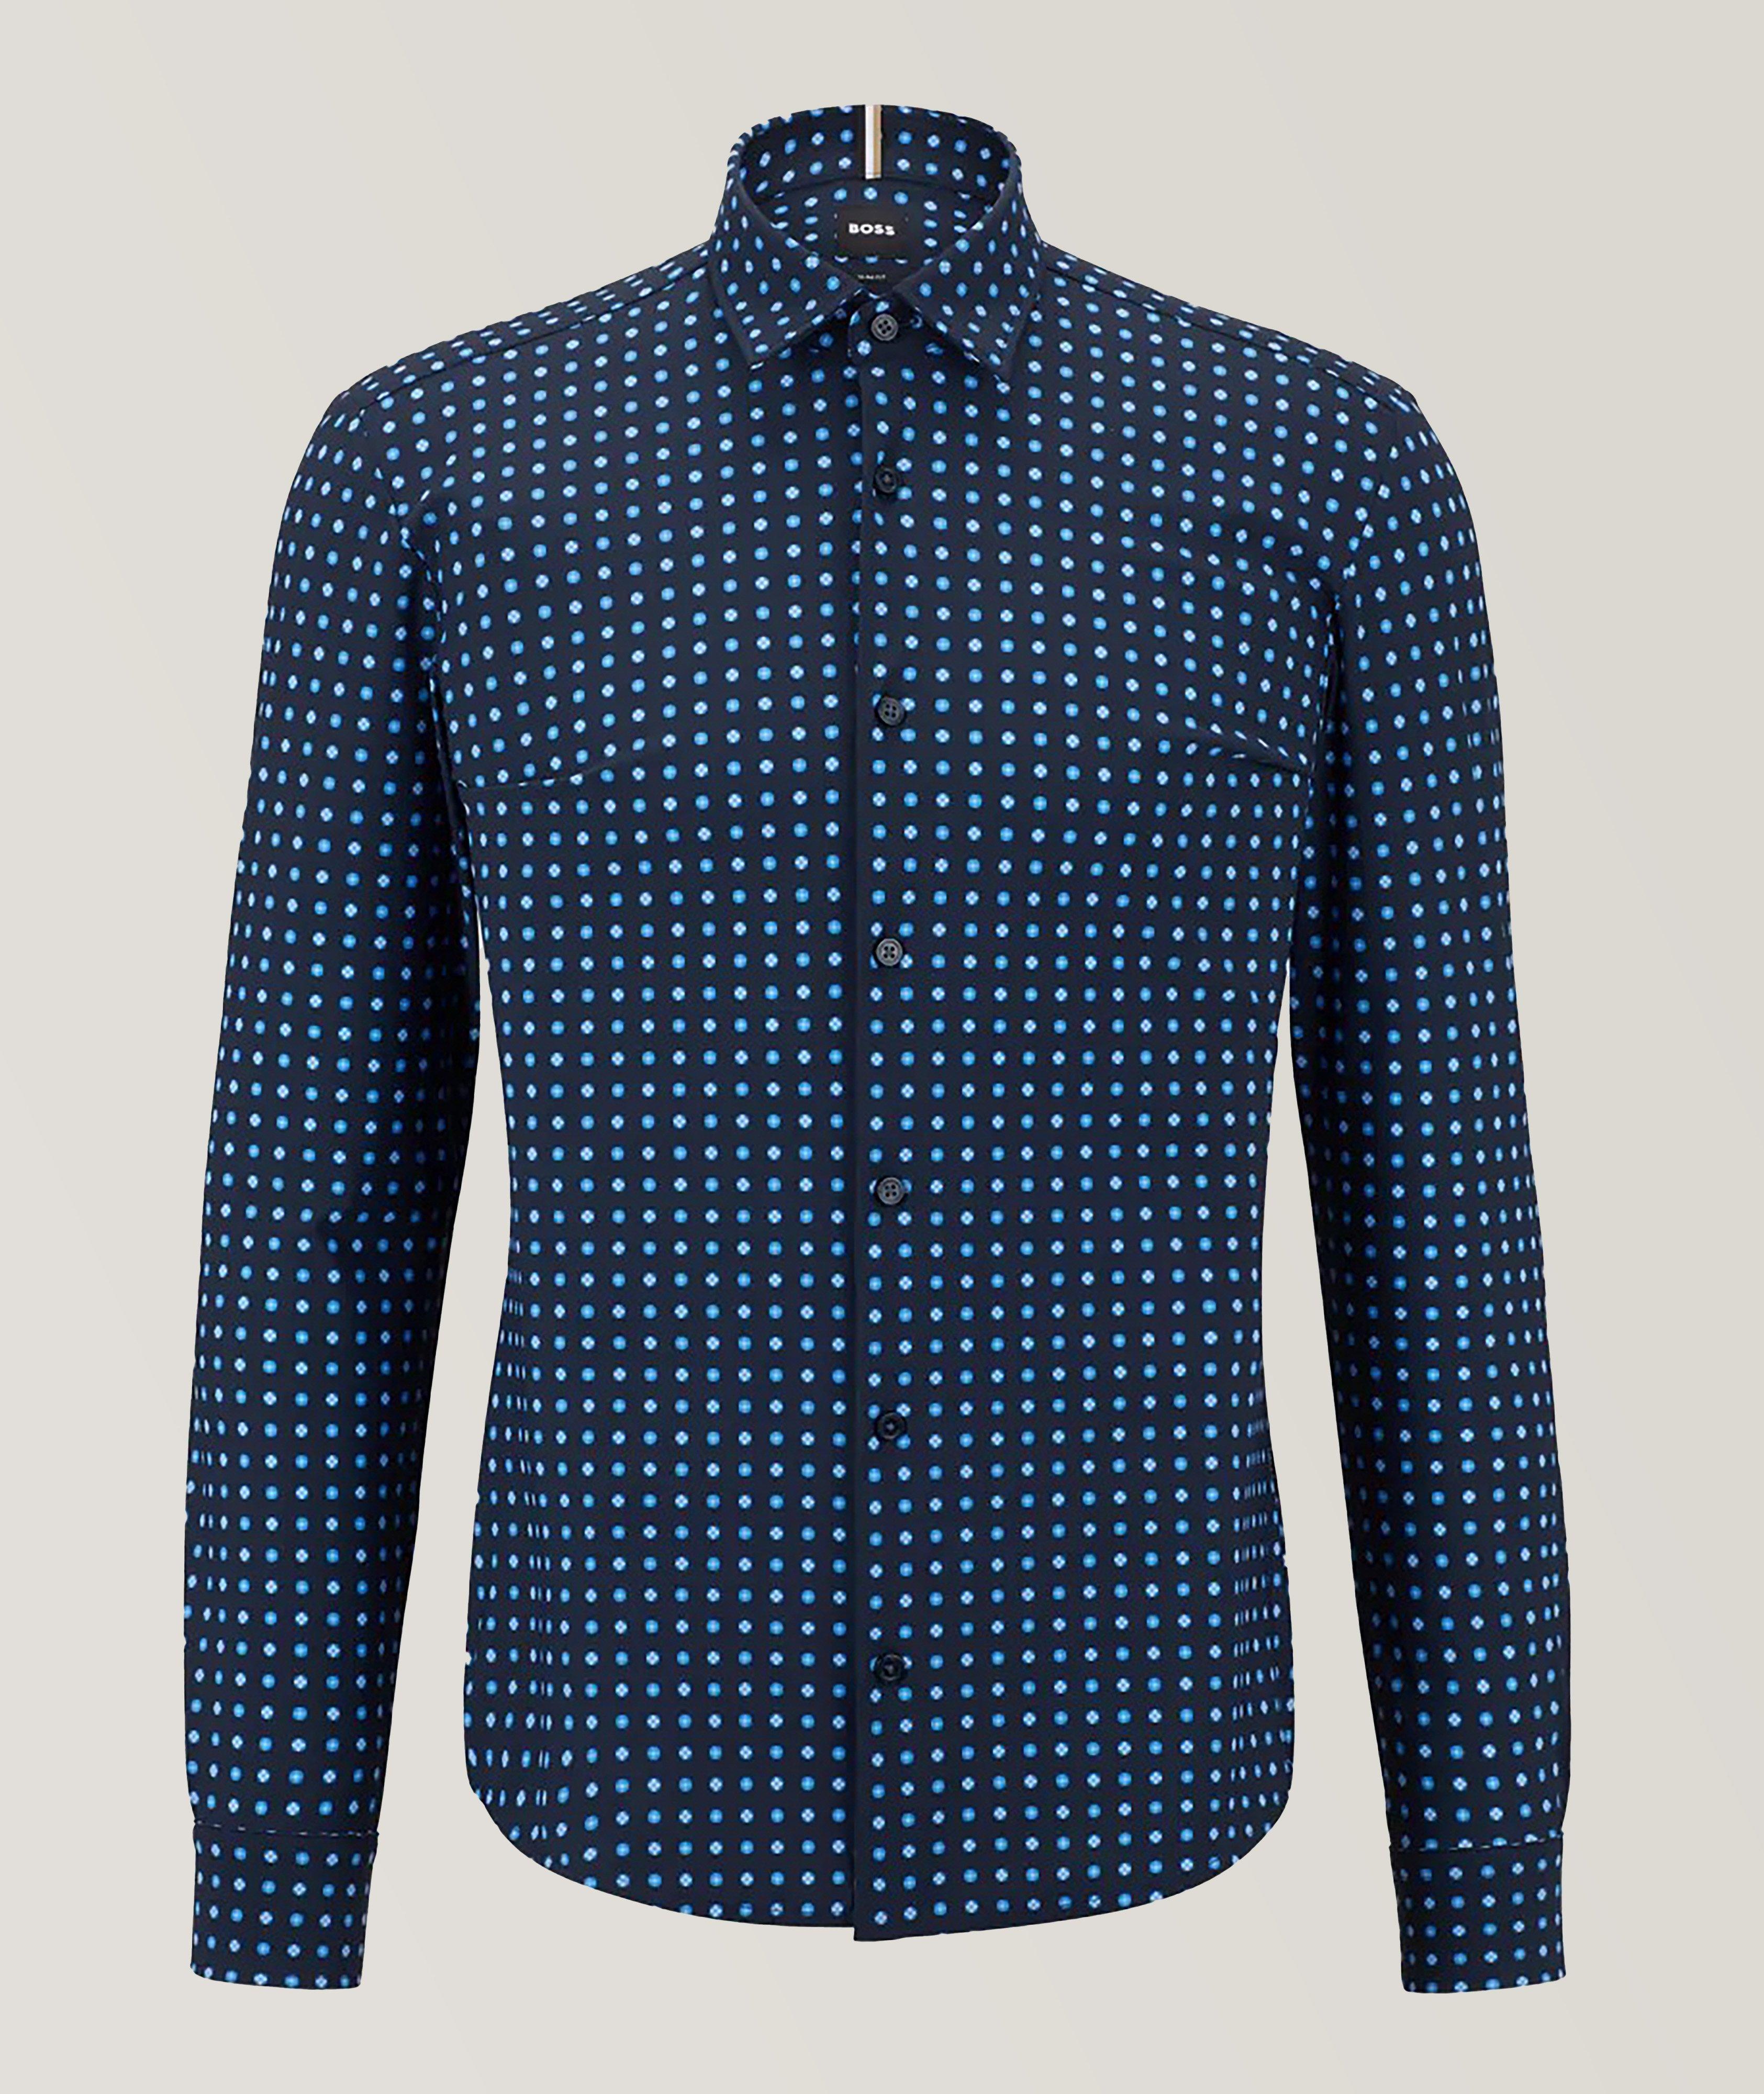 Slim-Fit Dotted Print Jersey Cotton Sport Shirt image 0